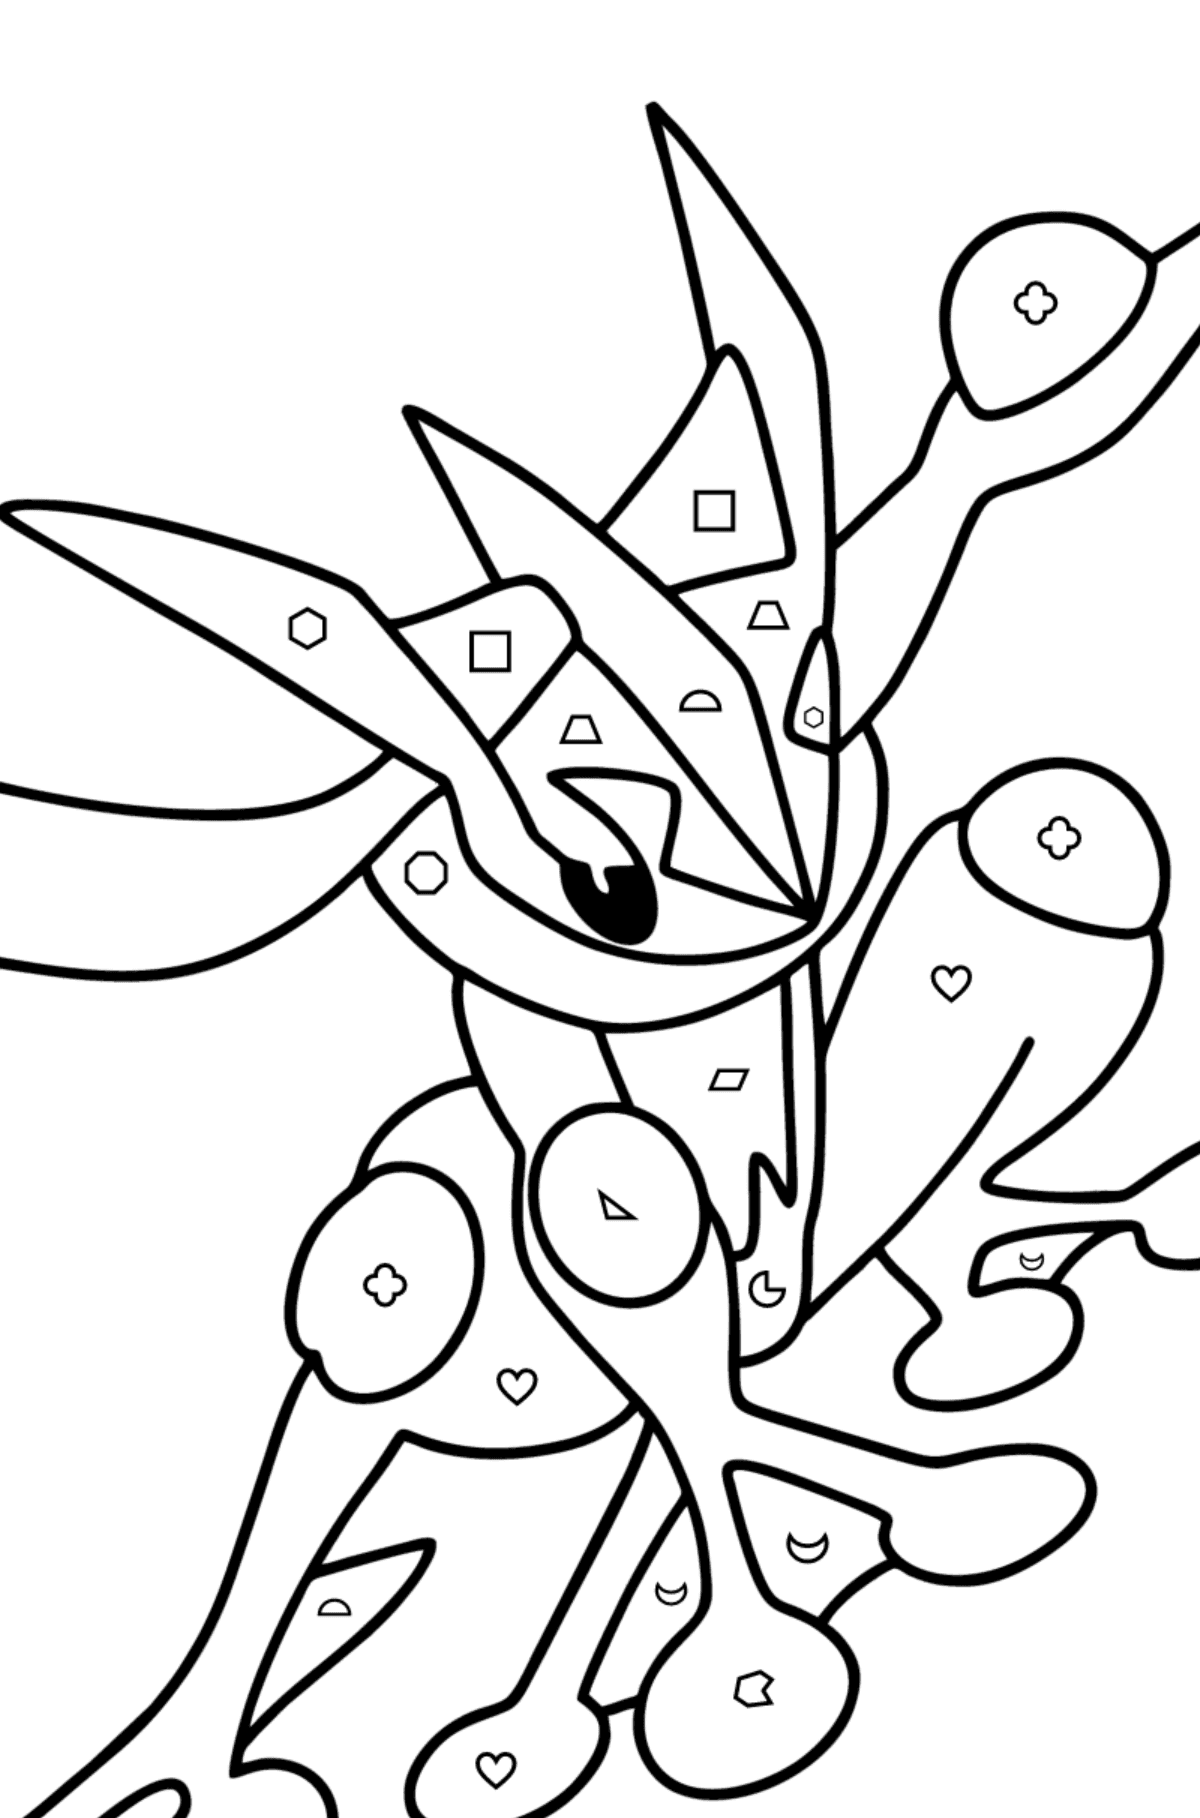 Coloring page Pokemon Go Greninja - Coloring by Geometric Shapes for Kids